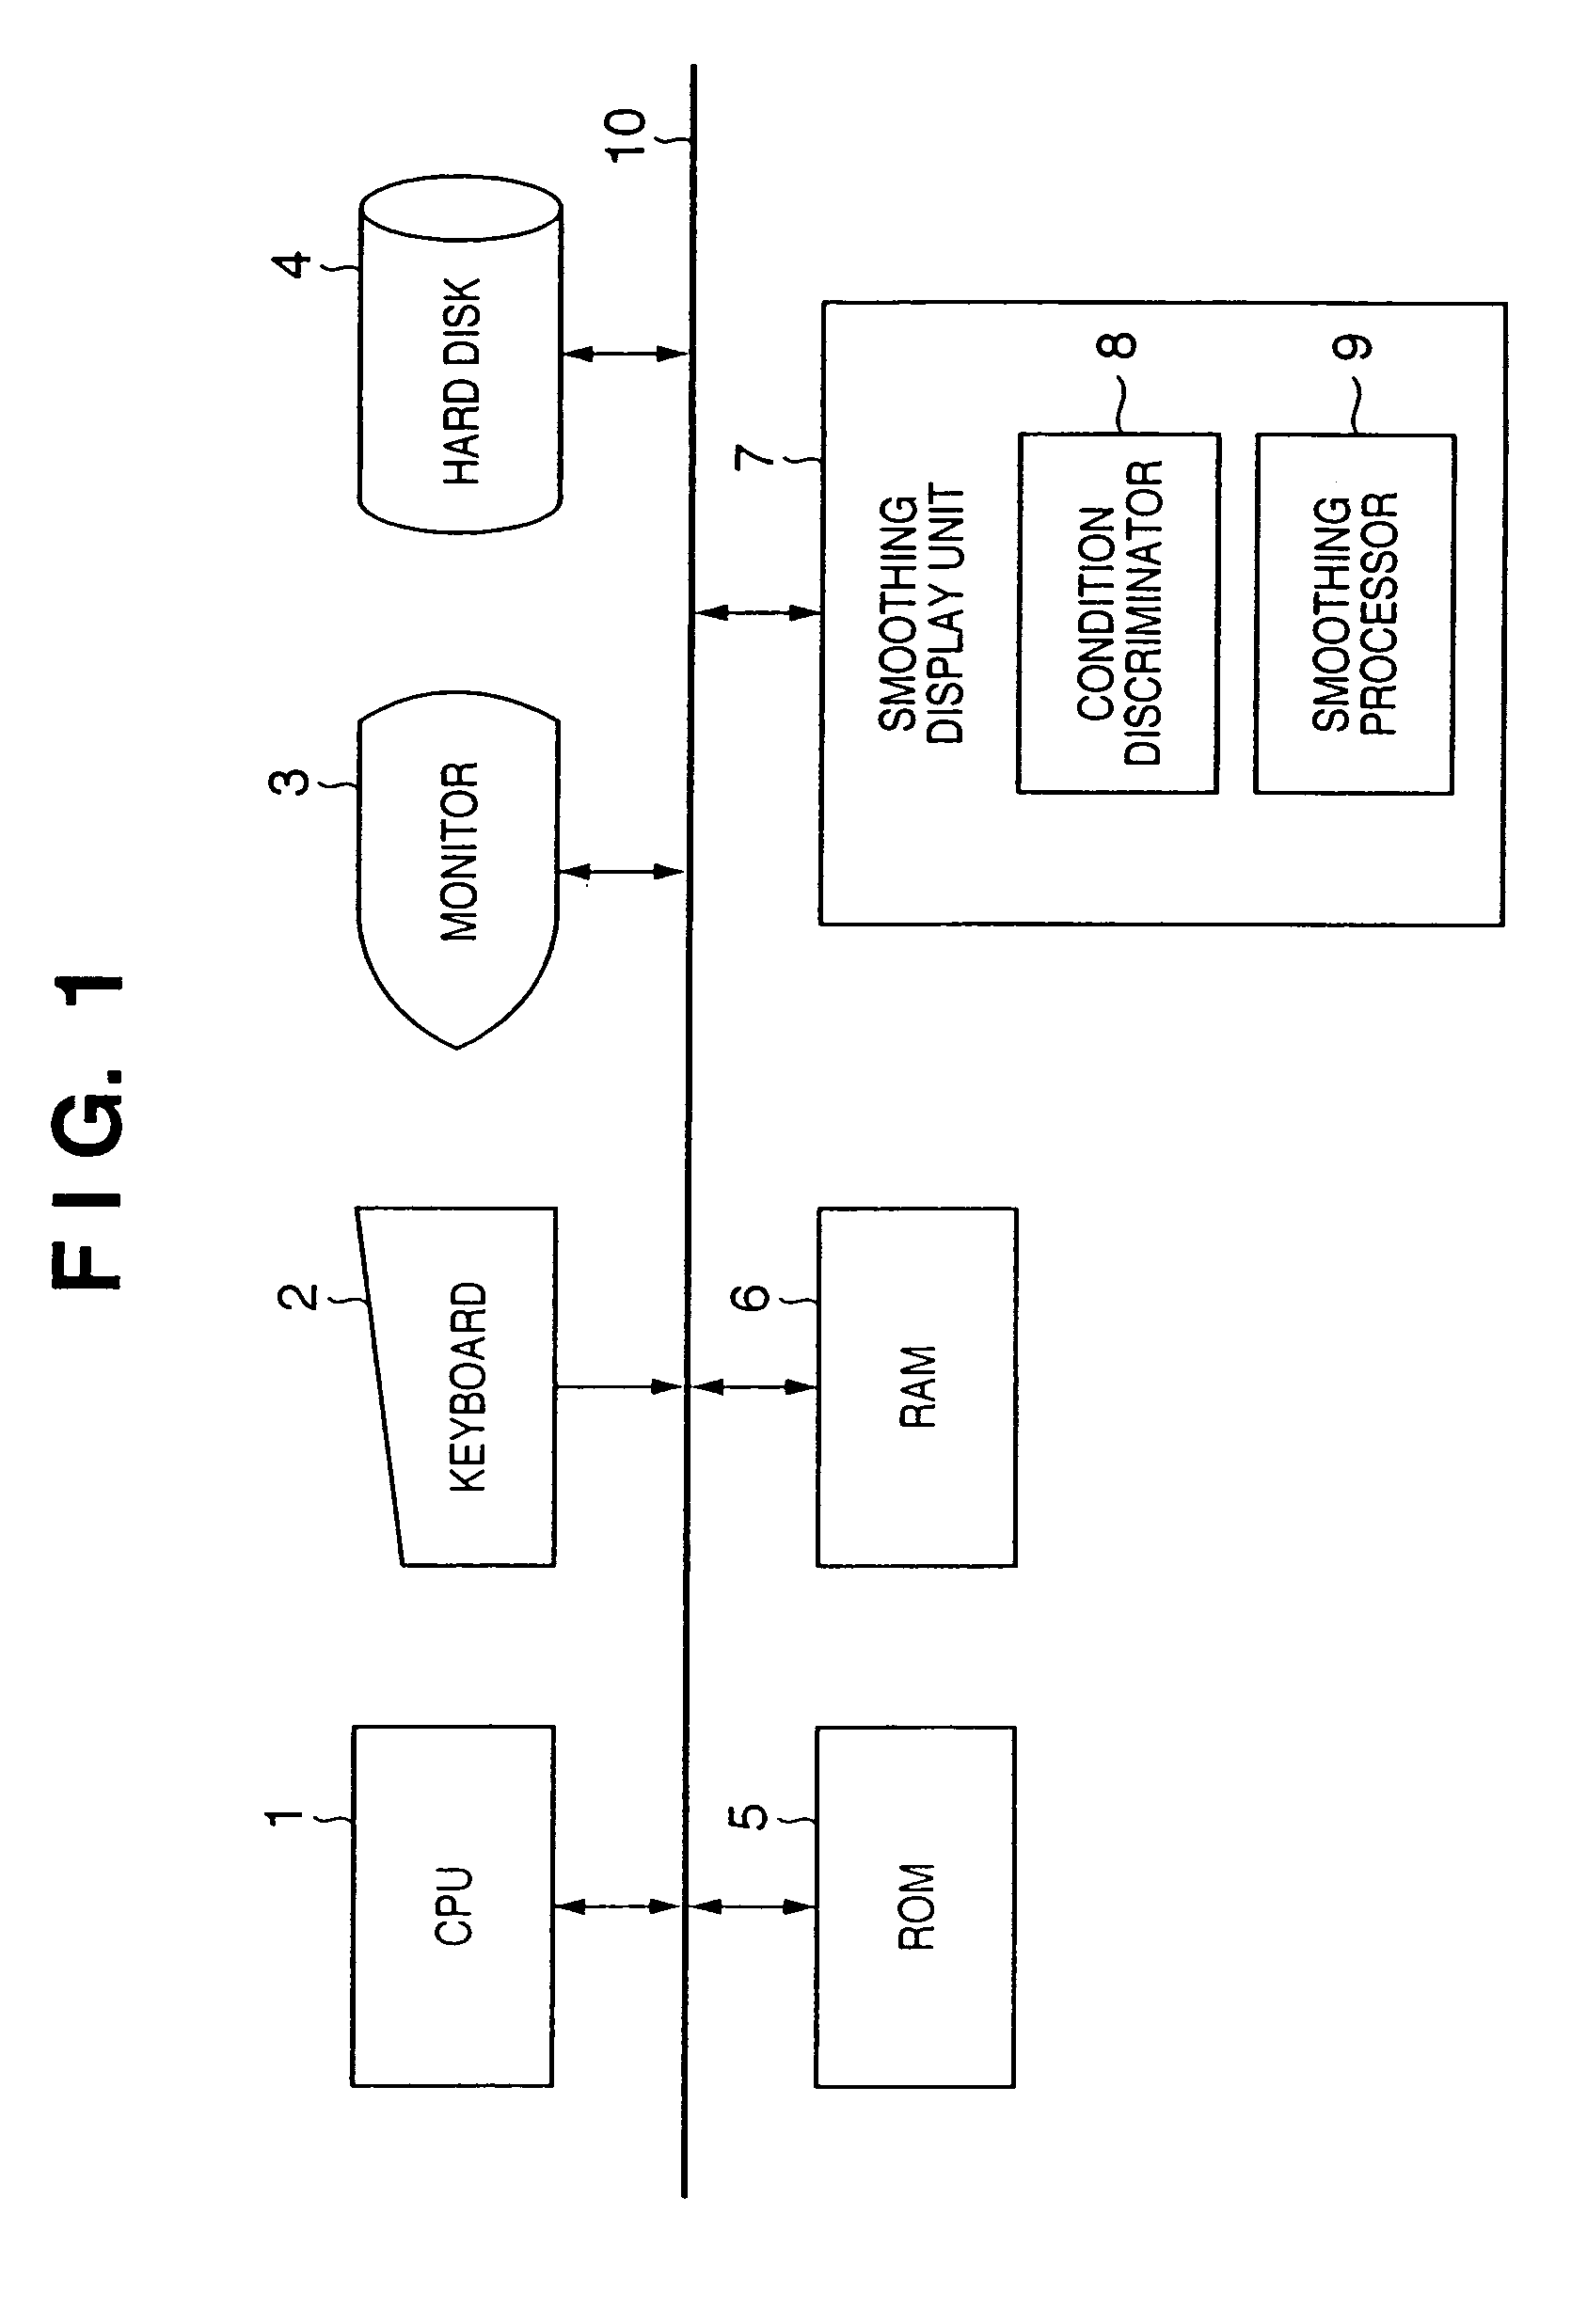 Document display method and apparatus